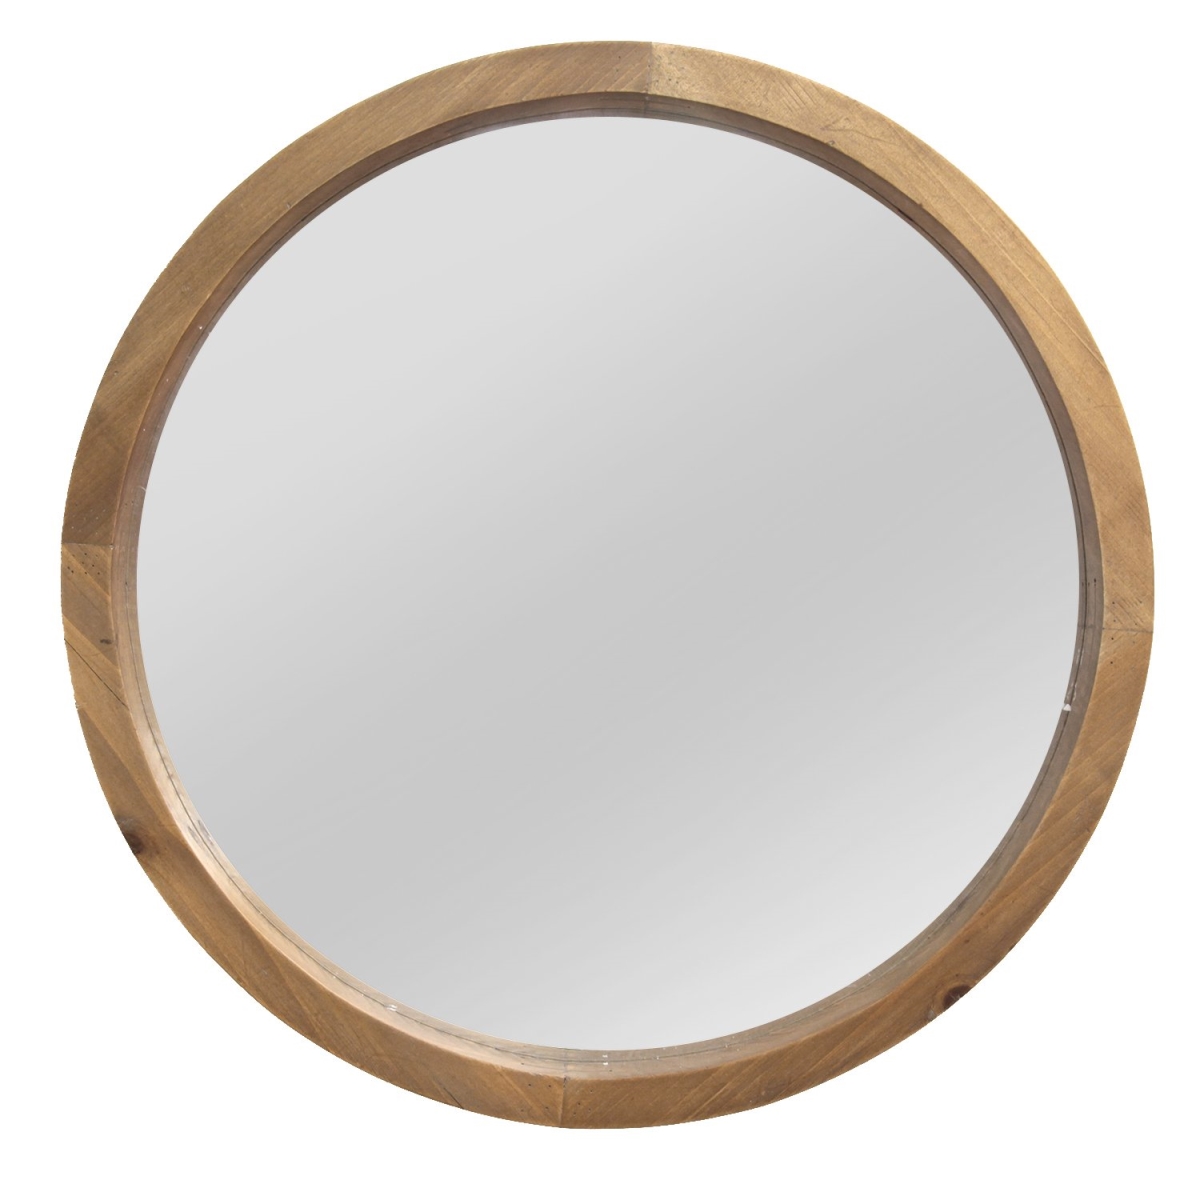 Home Roots 321298 Wood Mirror With Natural Wood-grain Color, Light Natural Wood